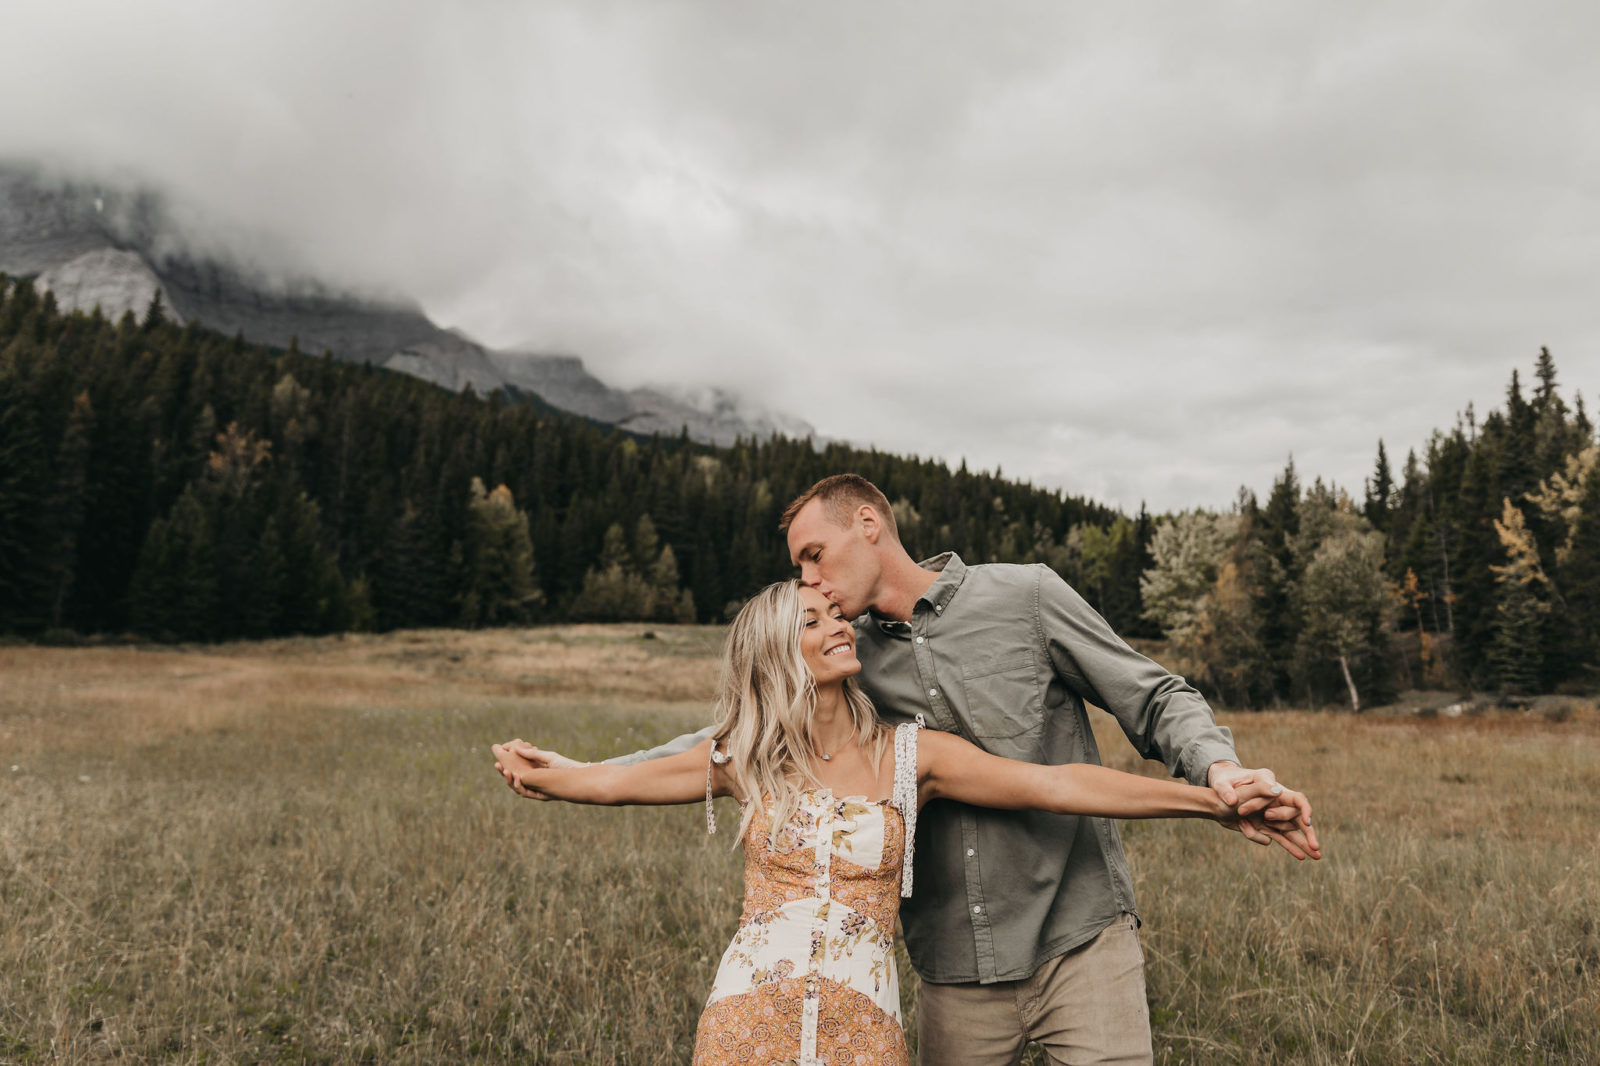 6 Tips All About Choosing Outfits For Your Engagement Session - Kadie Hummel featured on Bronte Bride